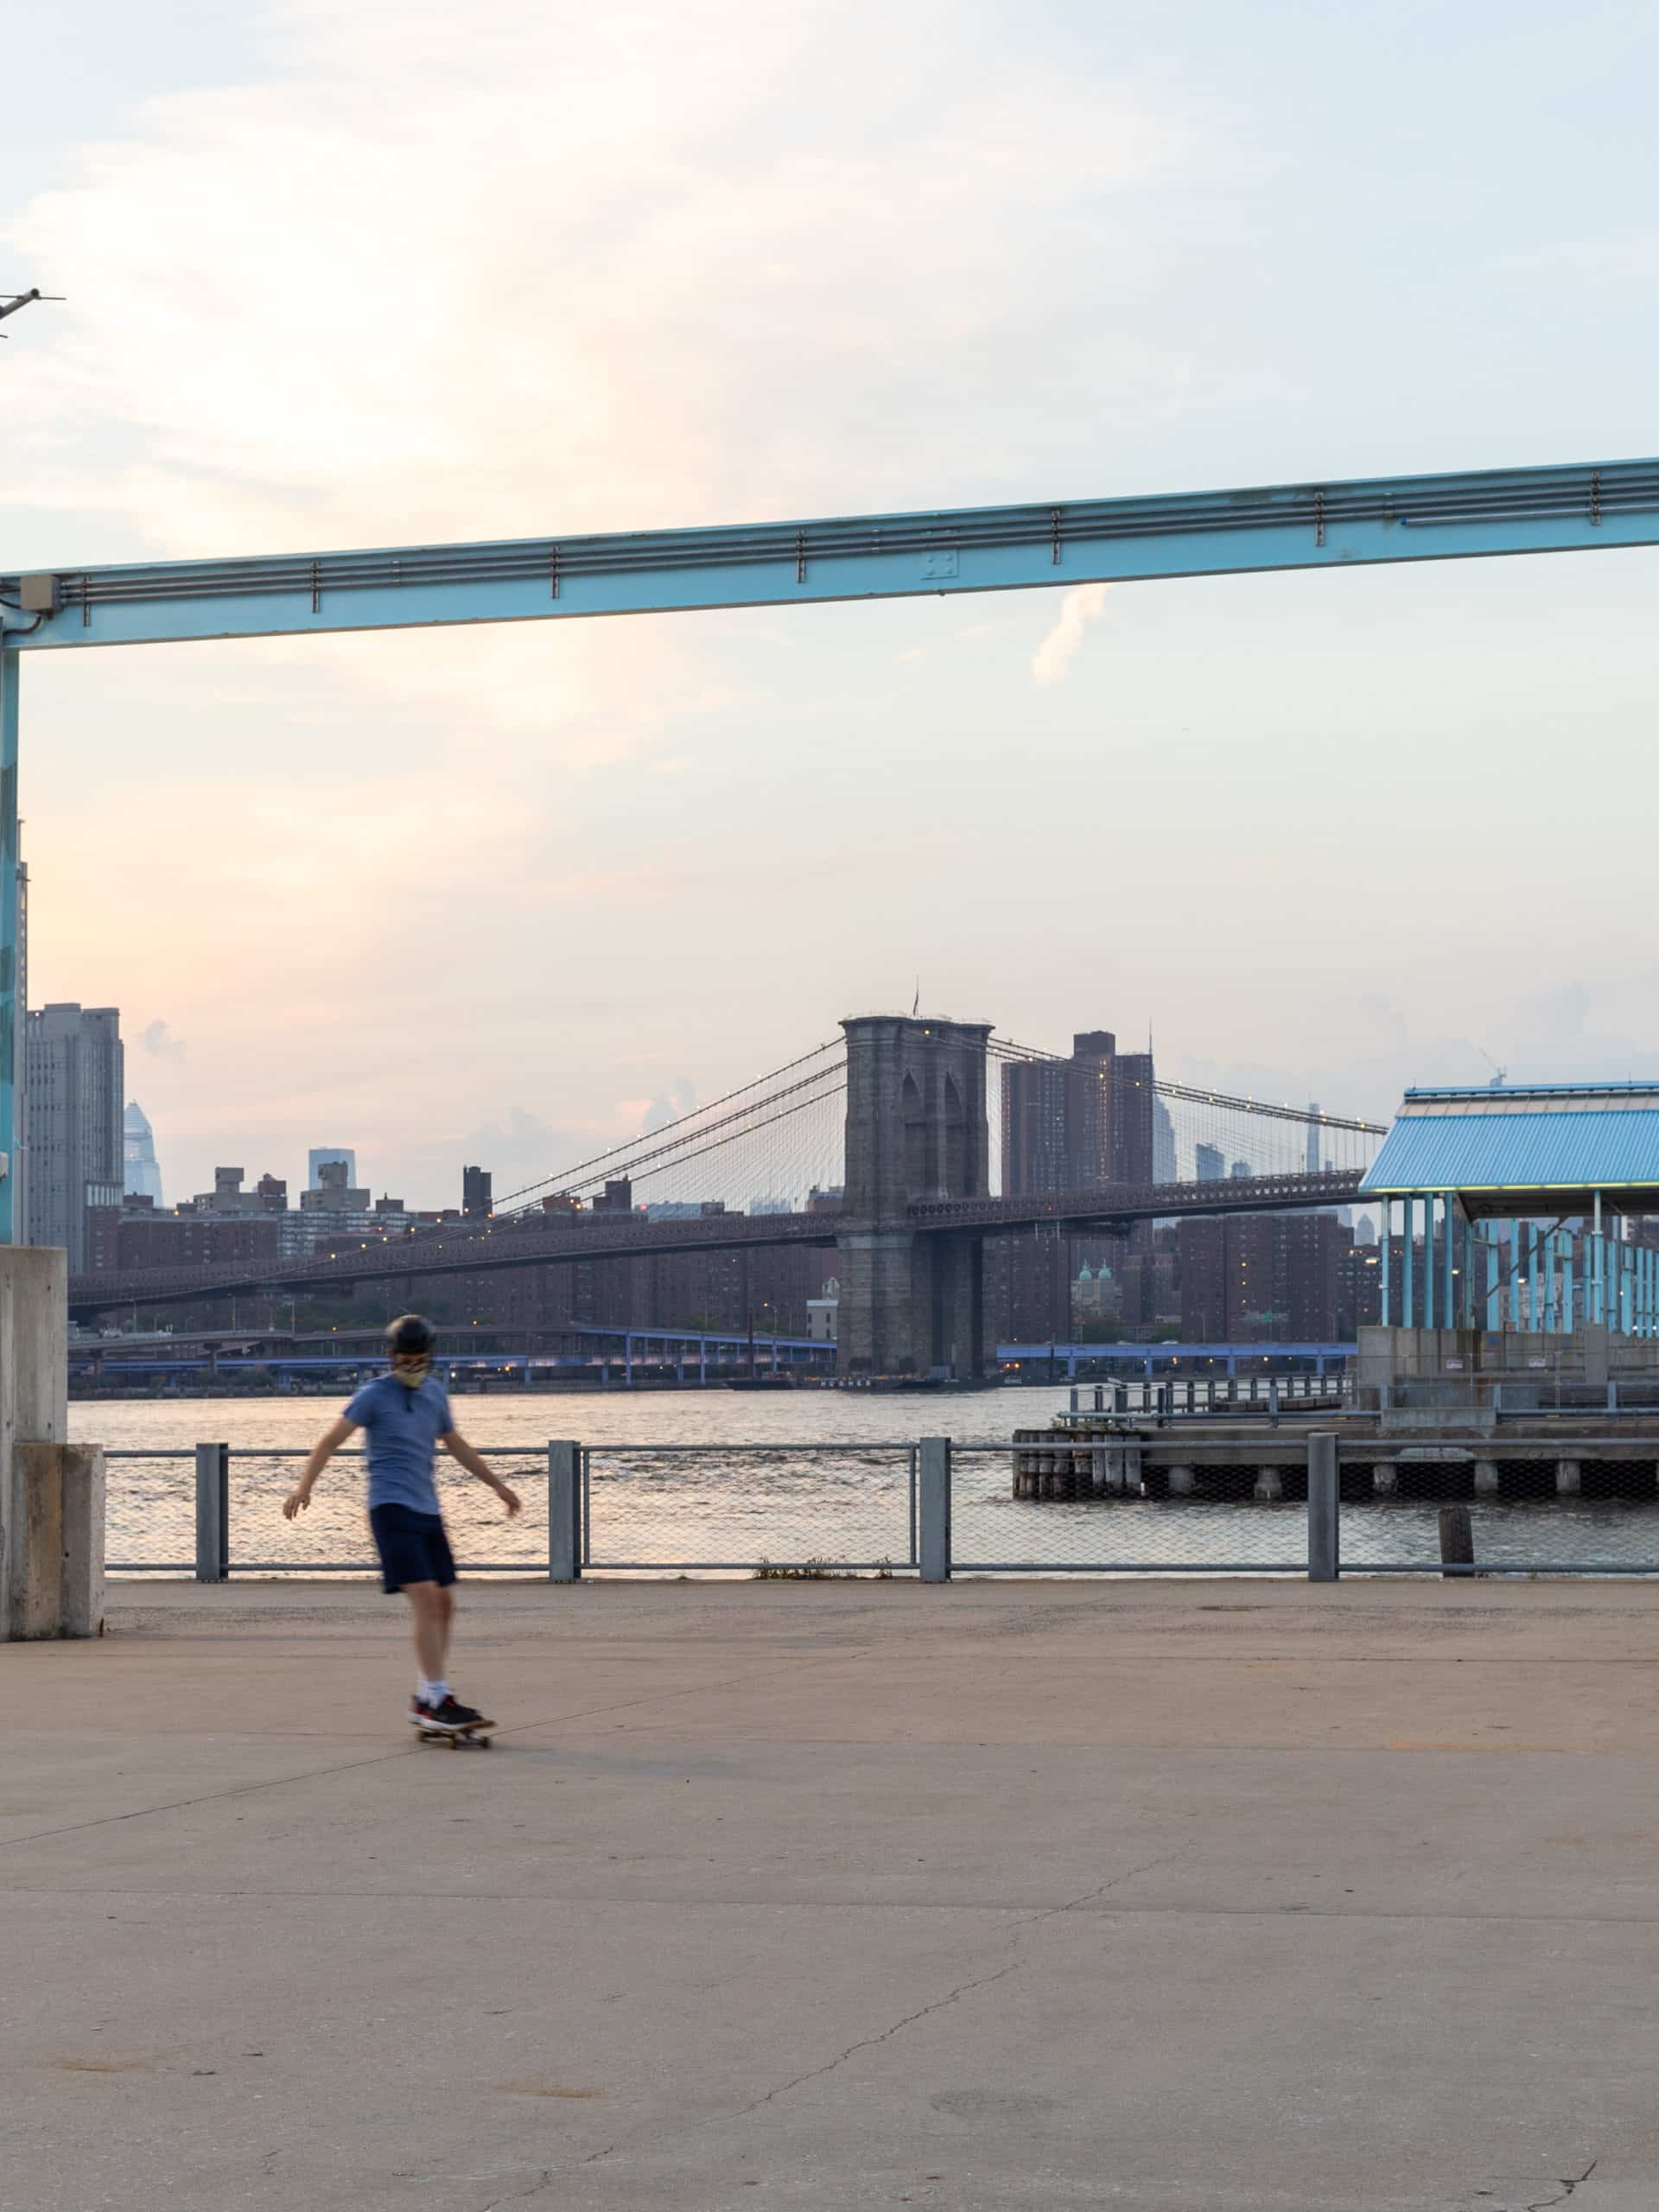 Boy skateboarding on Pier 3 Plaza with Pier 2 and Brooklyn Bridge in background at sunset.